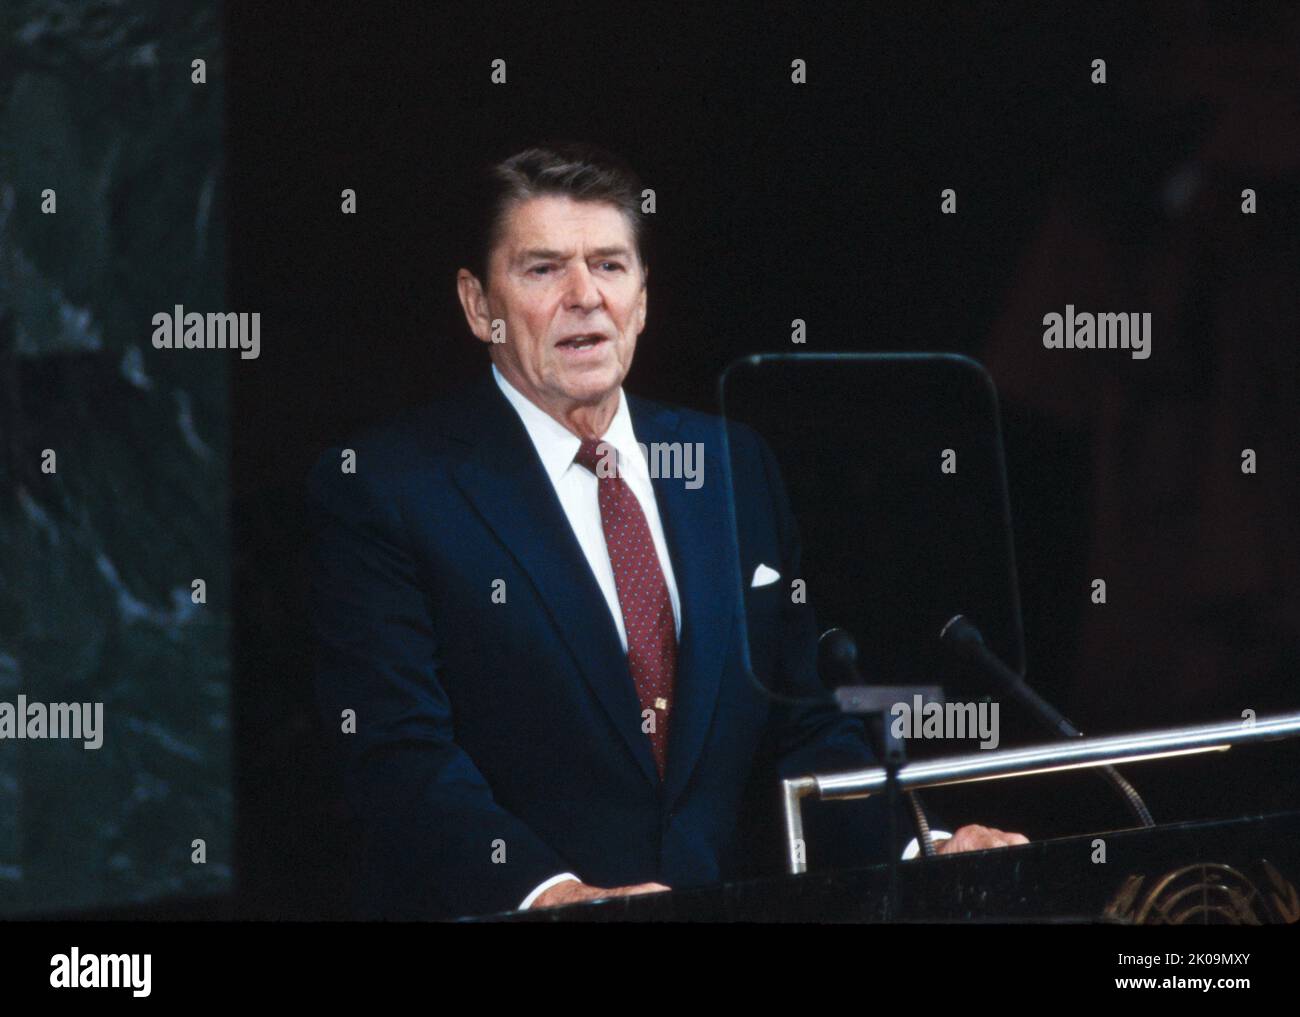 Ronald Wilson Reagan (1911 - 2004) American politician who served as the 40th president of the United States from 1981 to 1989. A member of the Republican Party, he previously served as the 33rd governor of California from 1967 to 1975 after a career as a Hollywood actor and union leader. Stock Photo